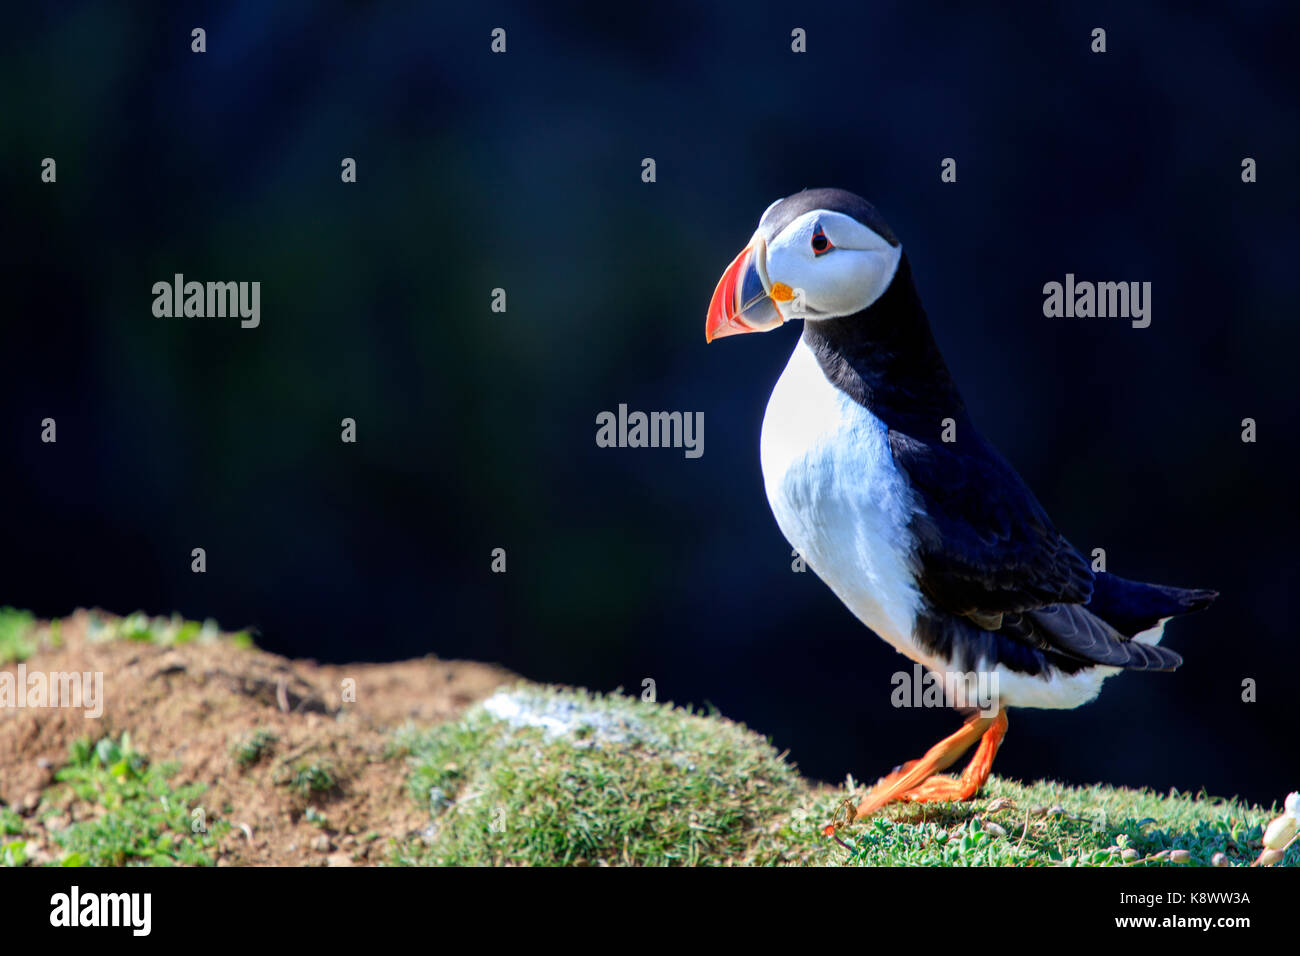 British Isles: A single adult Atlantic puffin, Fratercula Artica, walks across the headland on near the birds nesting site on a warm day. Stock Photo